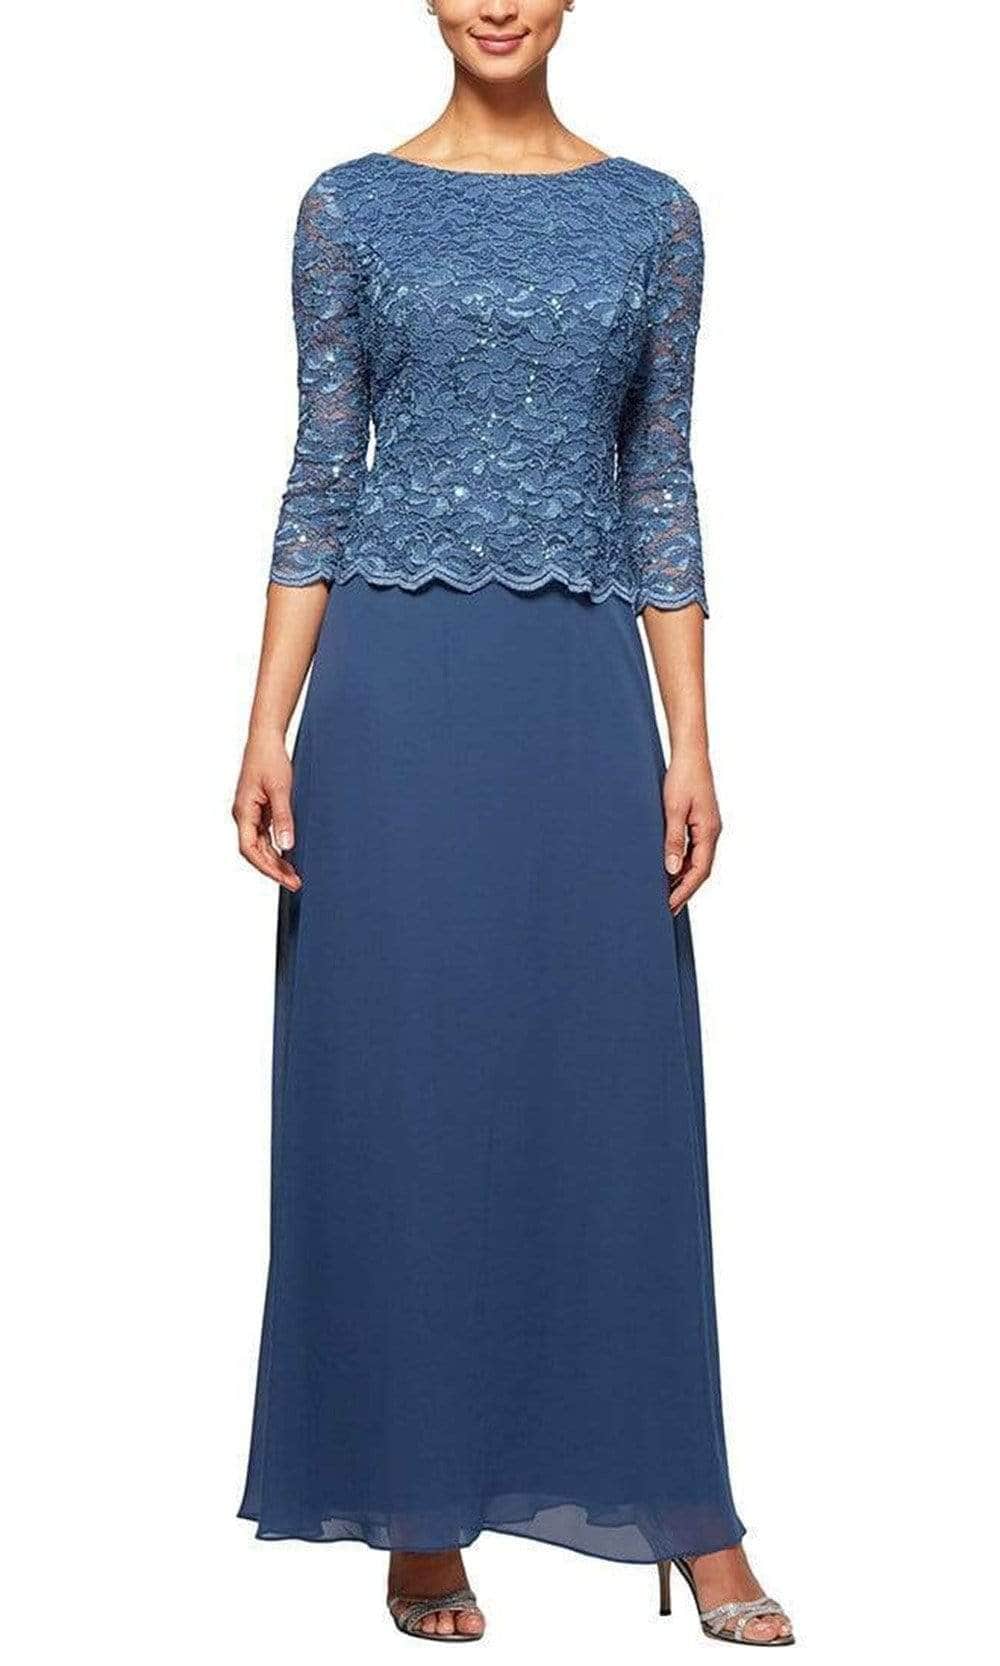 Alex Evenings - Scallop Lace Formal Dress 112655 - 1 pc Wedgewood In Size 8 Available CCSALE 8 / Wedgewood